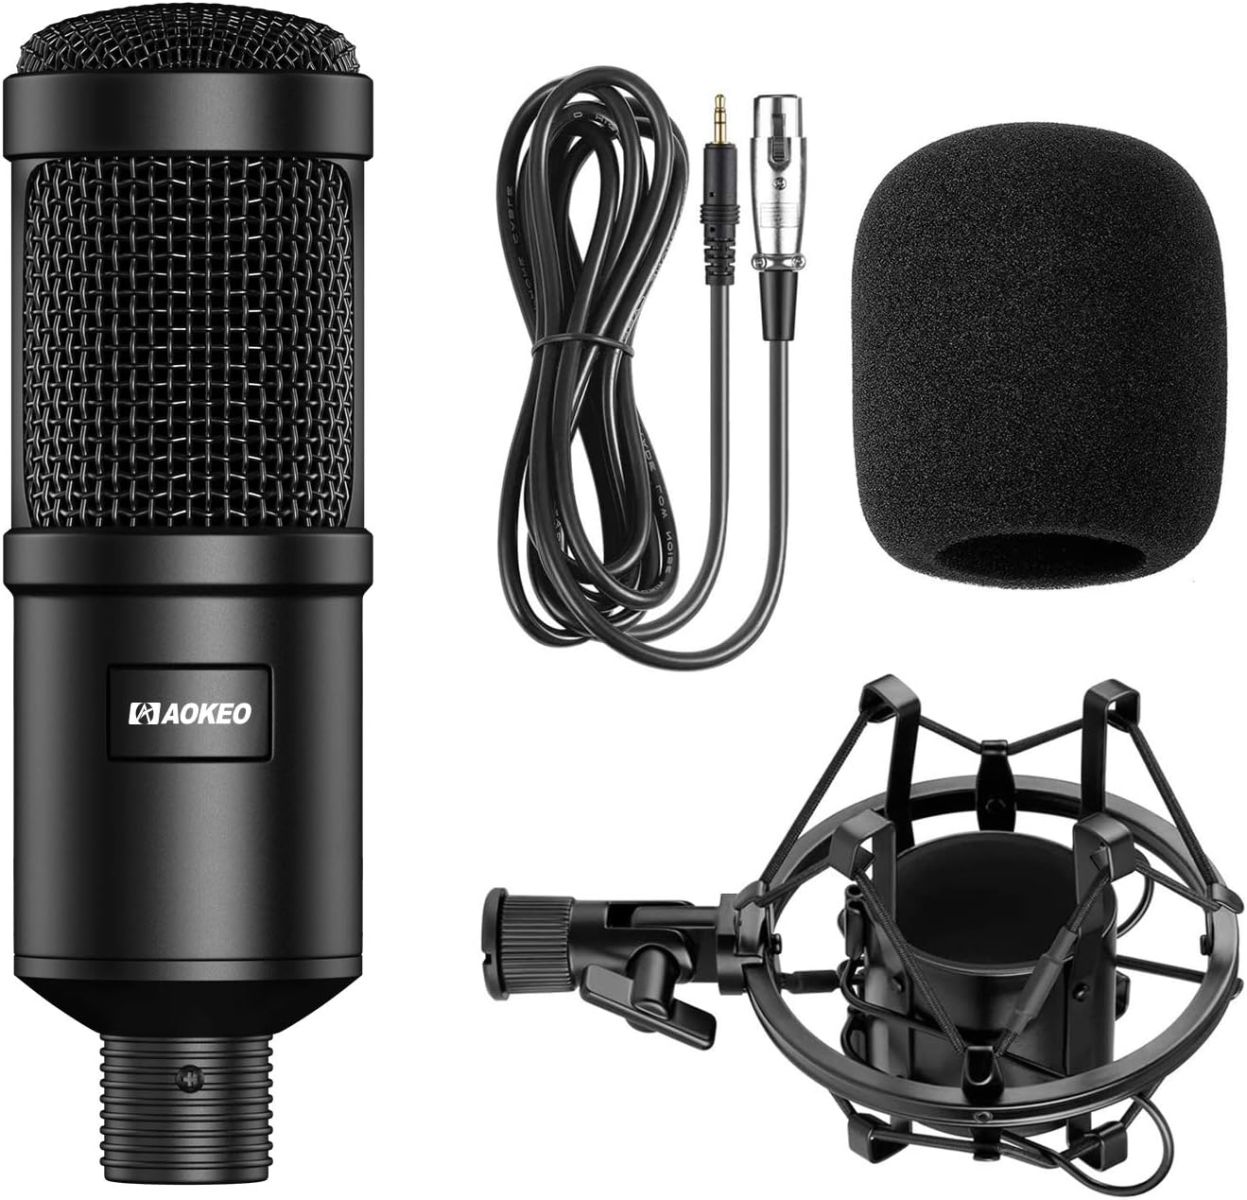 Aokeo AK-60 Professional Condenser Microphone, Music Studio MIC Podcast Recording Microphone Kit with Stand Shock Mount for PC Laptop Computer Broadcasting YouTube Vlogging Skype Chatting Gaming